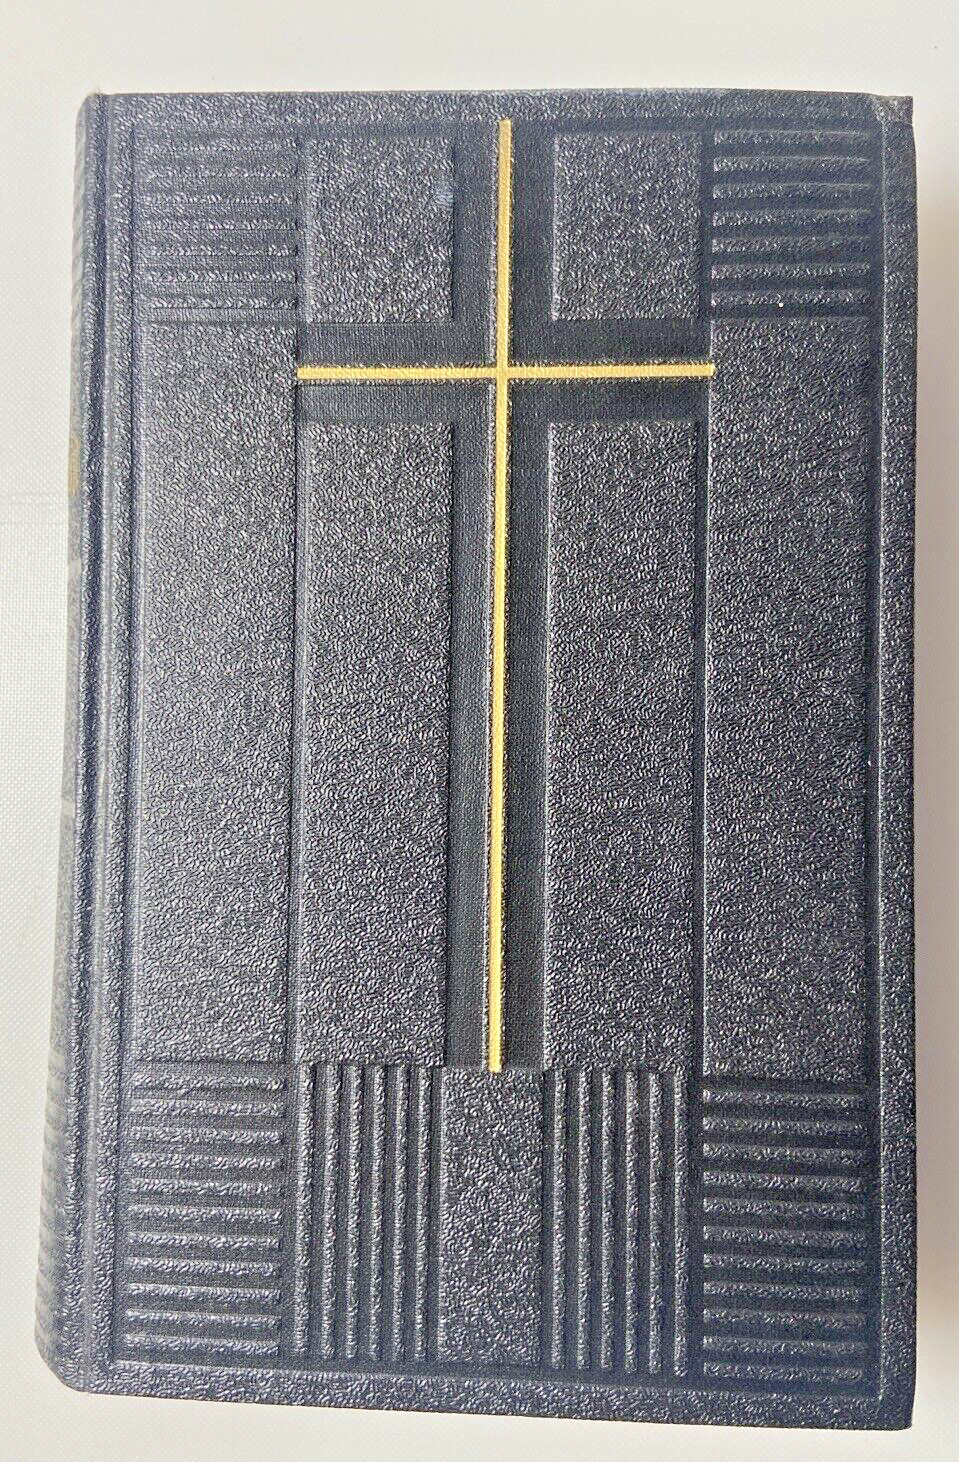 Die Heilige Schrift D Martin Luthers German Bible - American Bible Society 1954